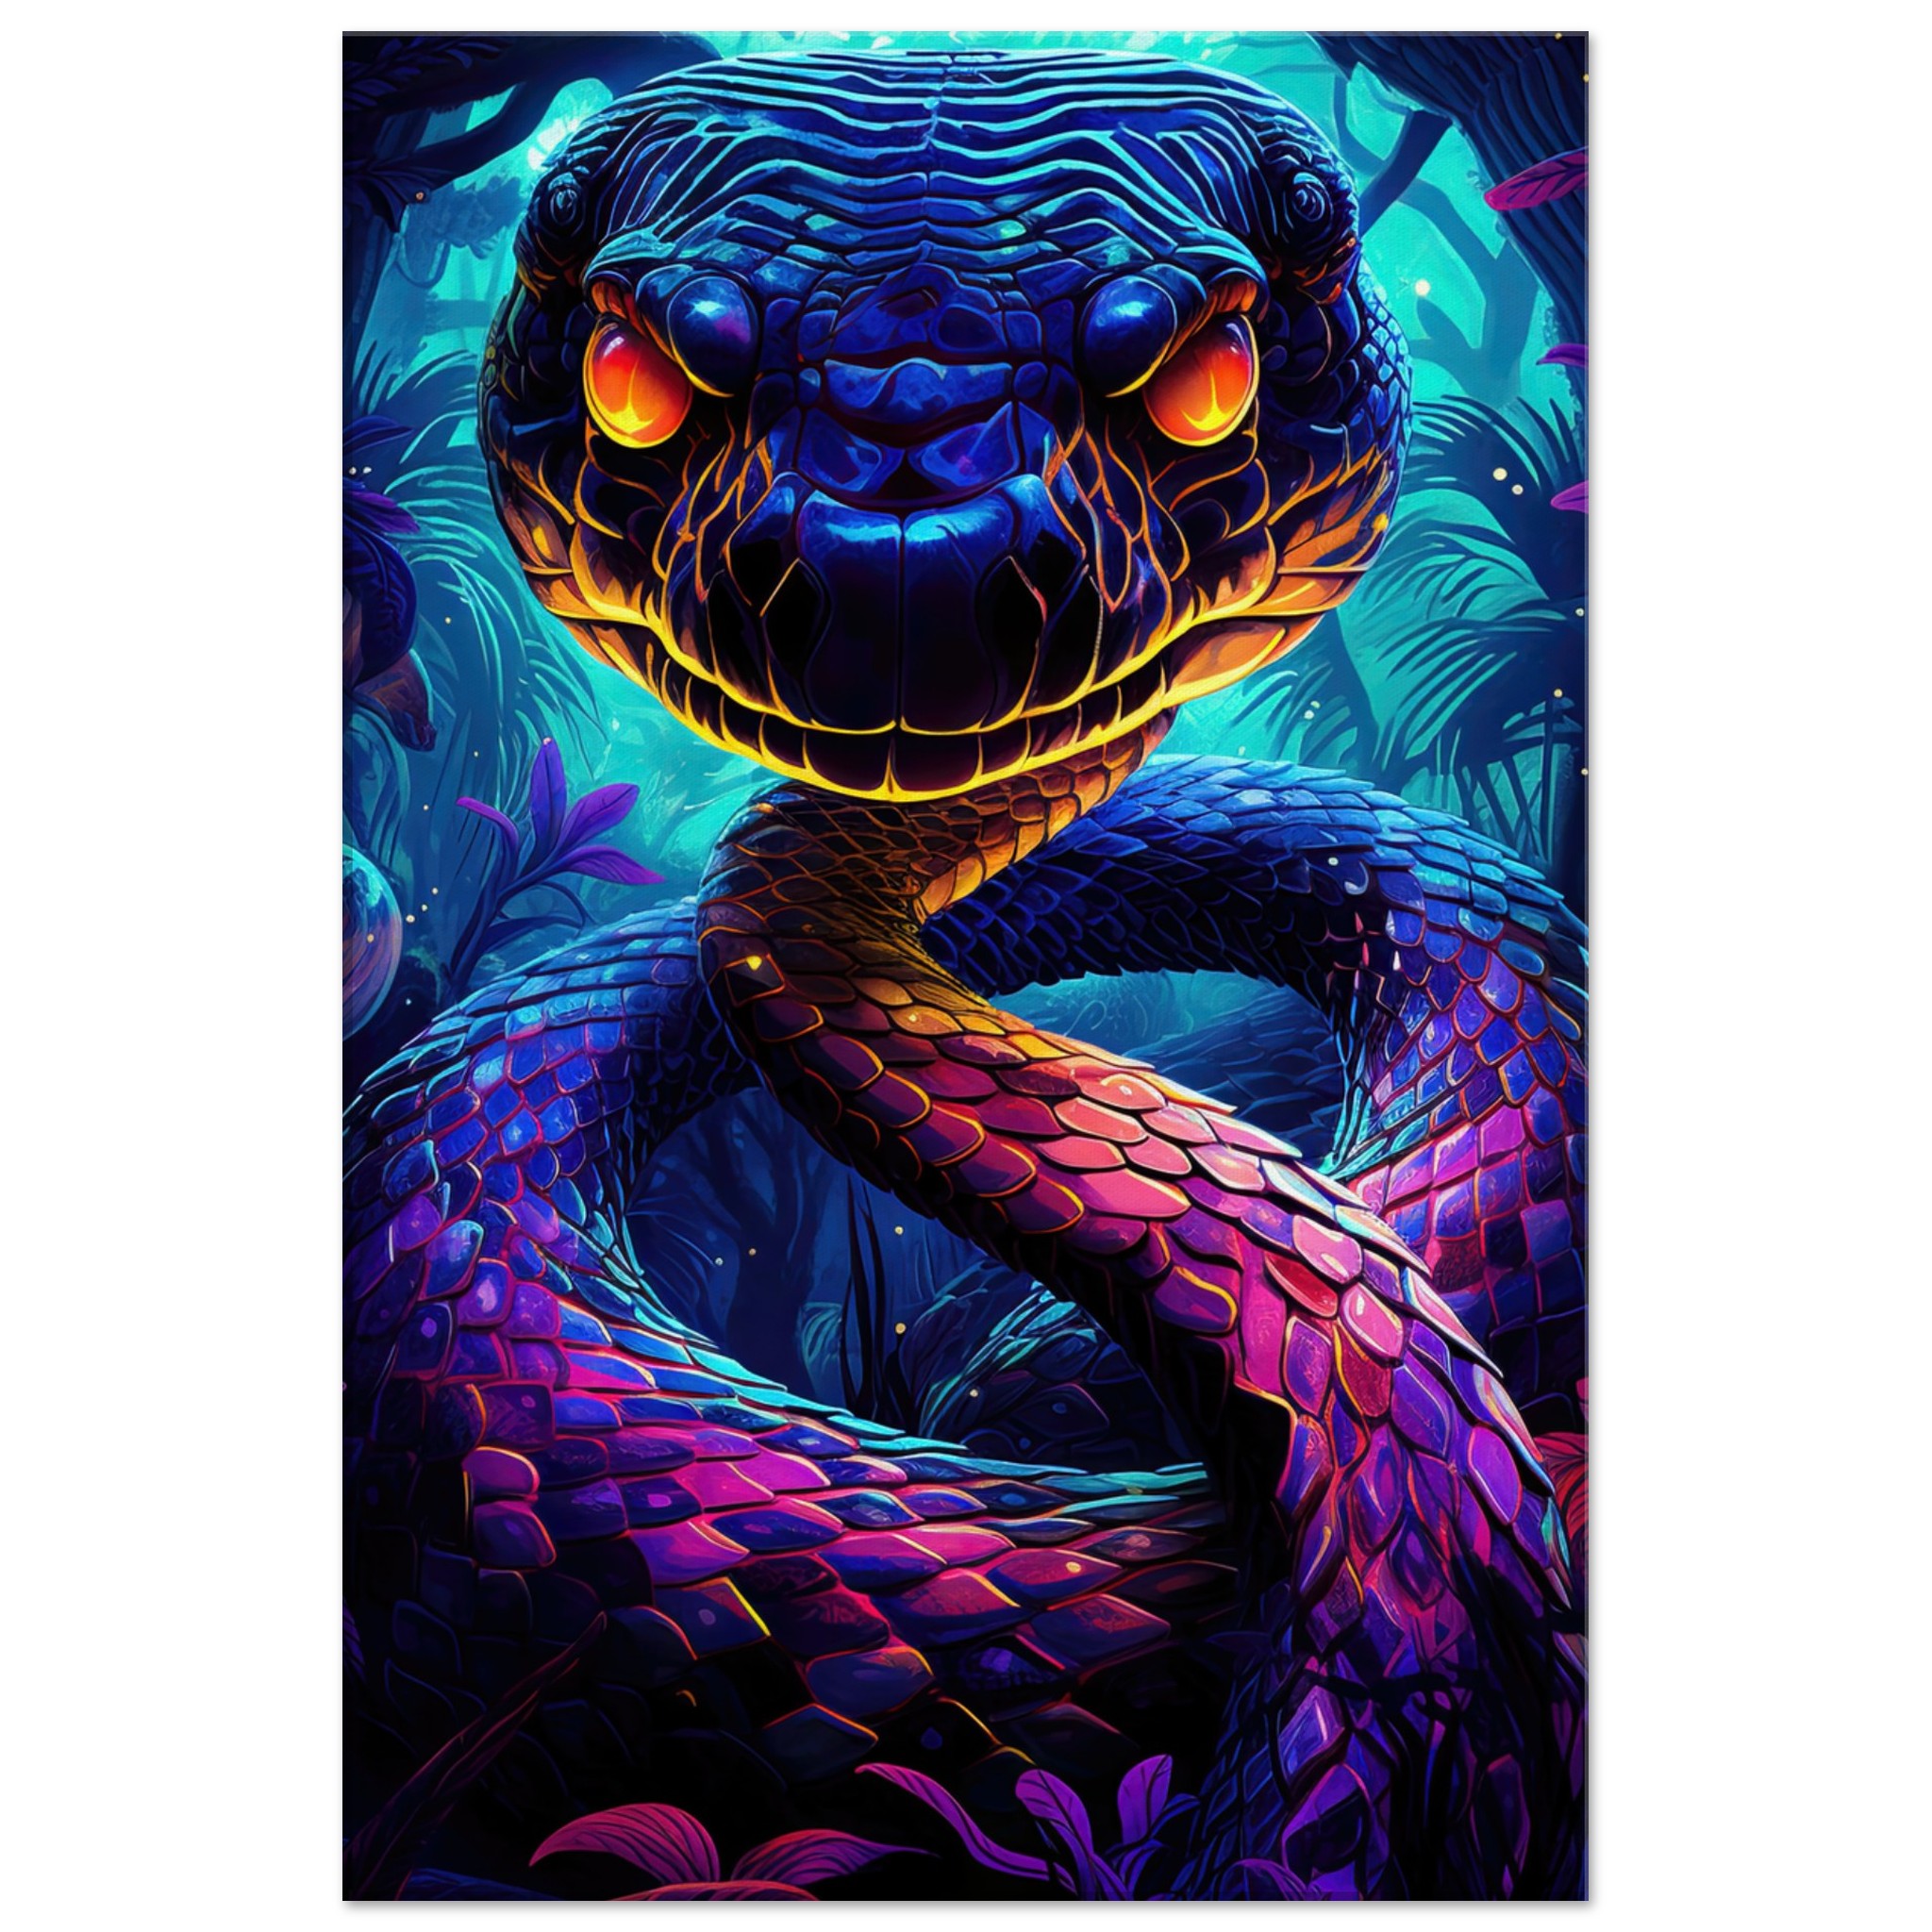 Psychedelic Snake Ultraviolet Colors Canvas Print – 50×75 cm / 20×30″, Thick